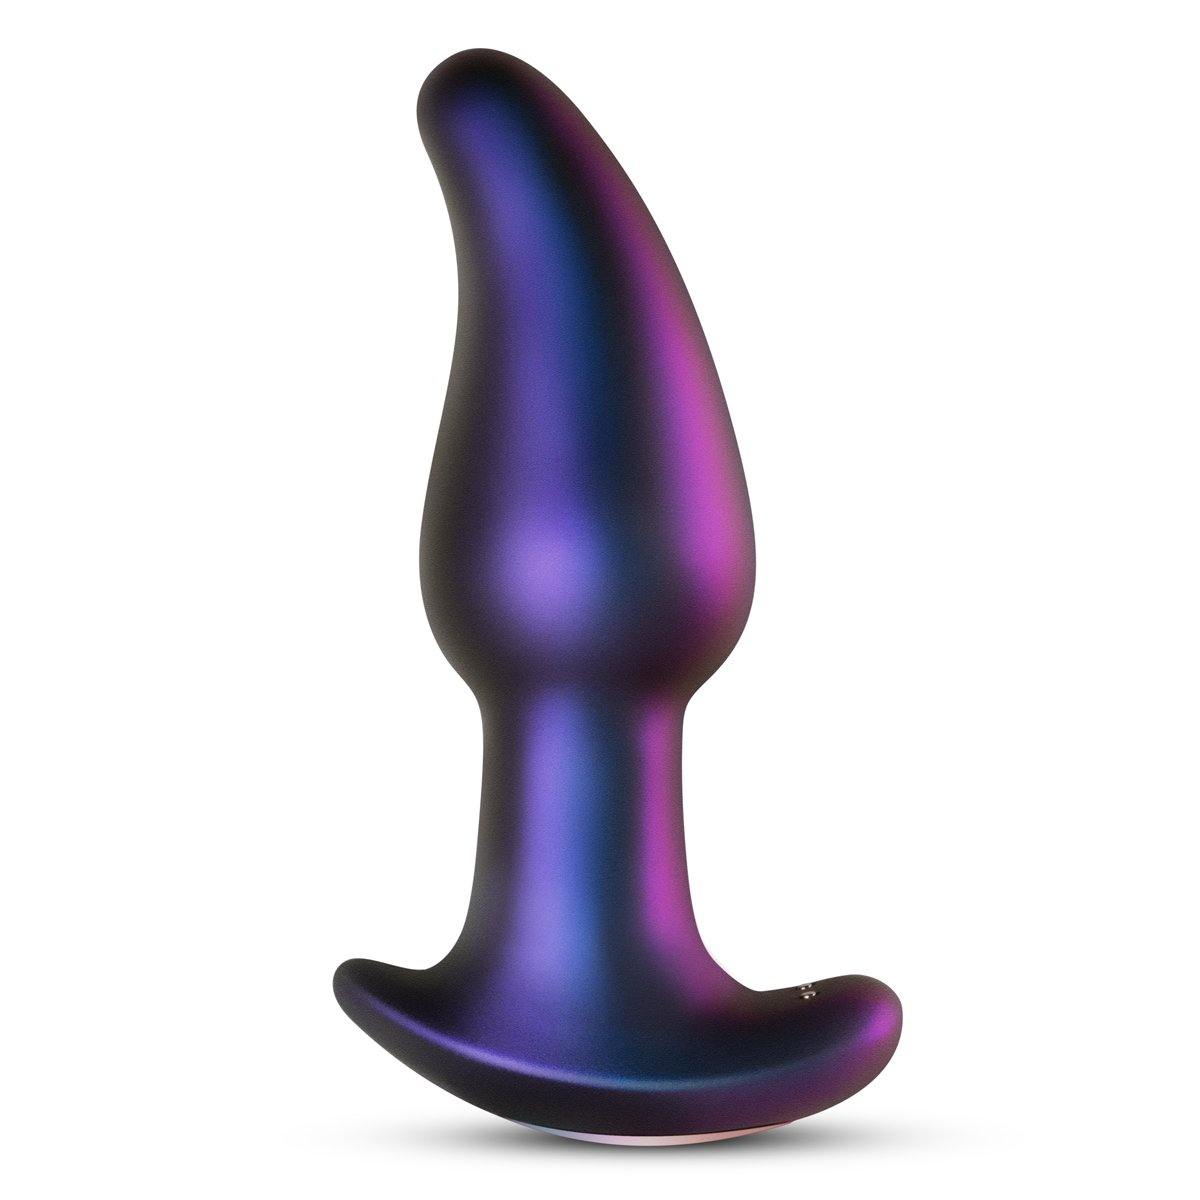 Hueman Asteroid Rimming Anal Plug - Buy At Luxury Toy X - Free 3-Day Shipping